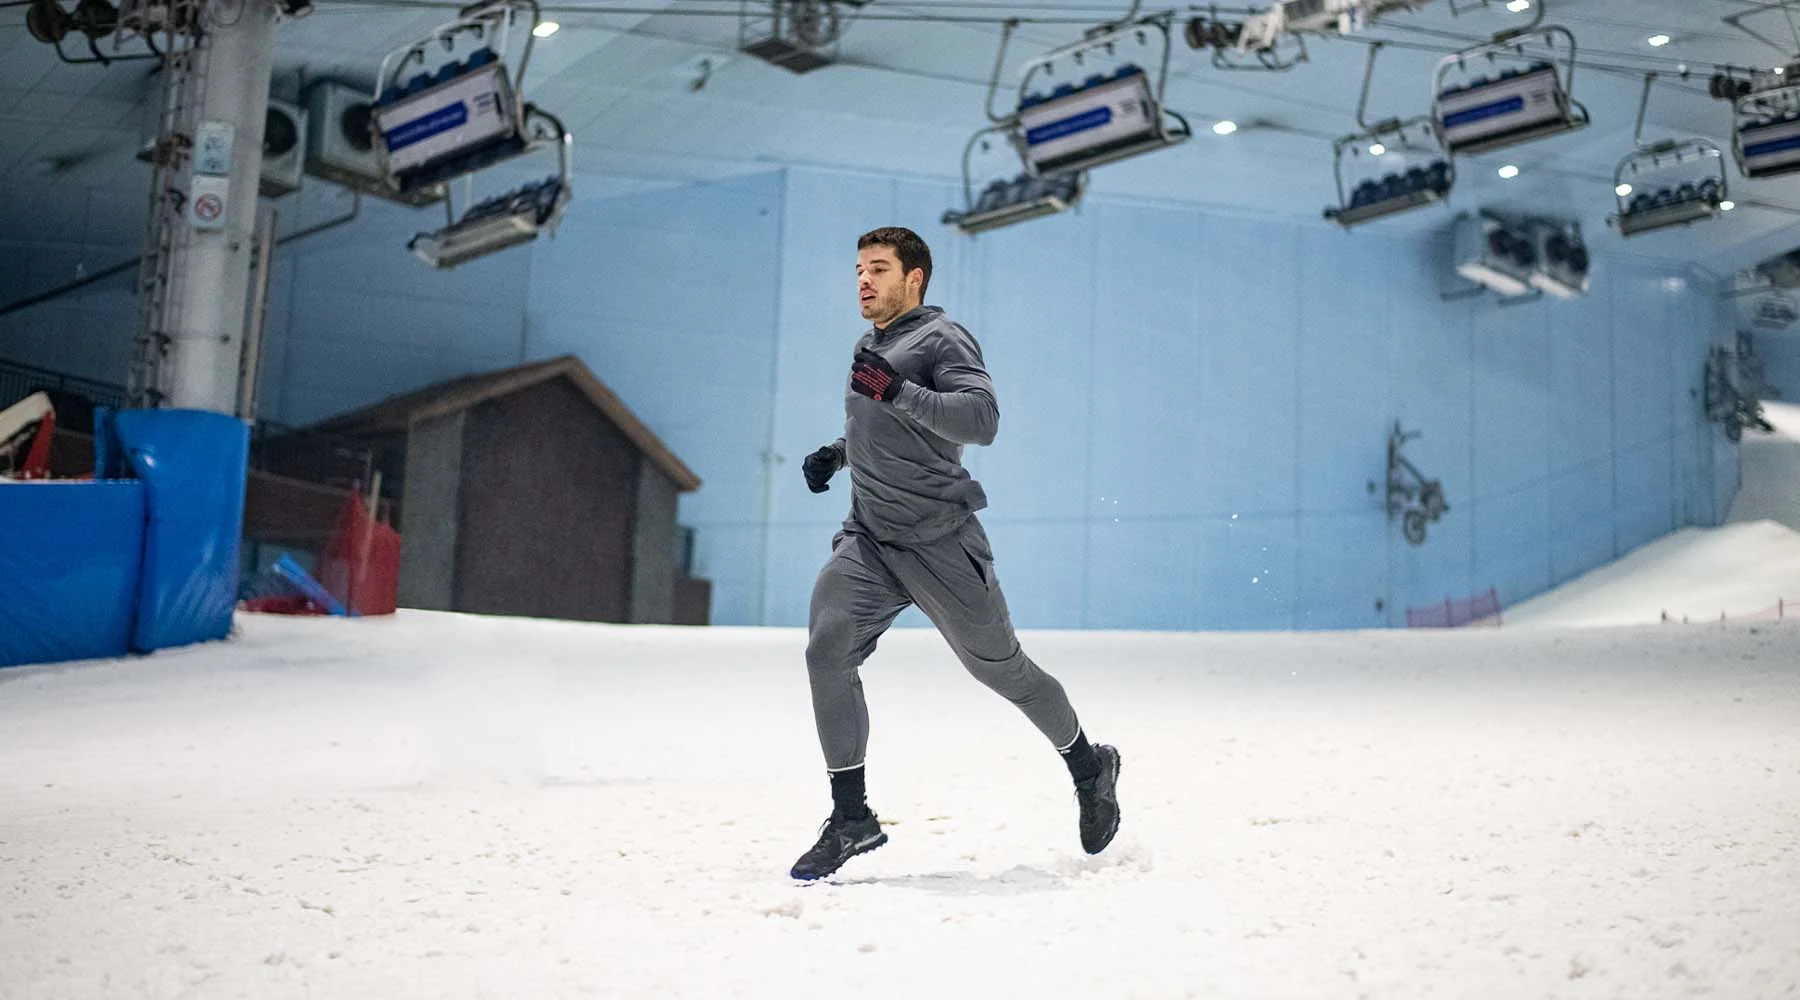 CrossFit Competition in the Snow?